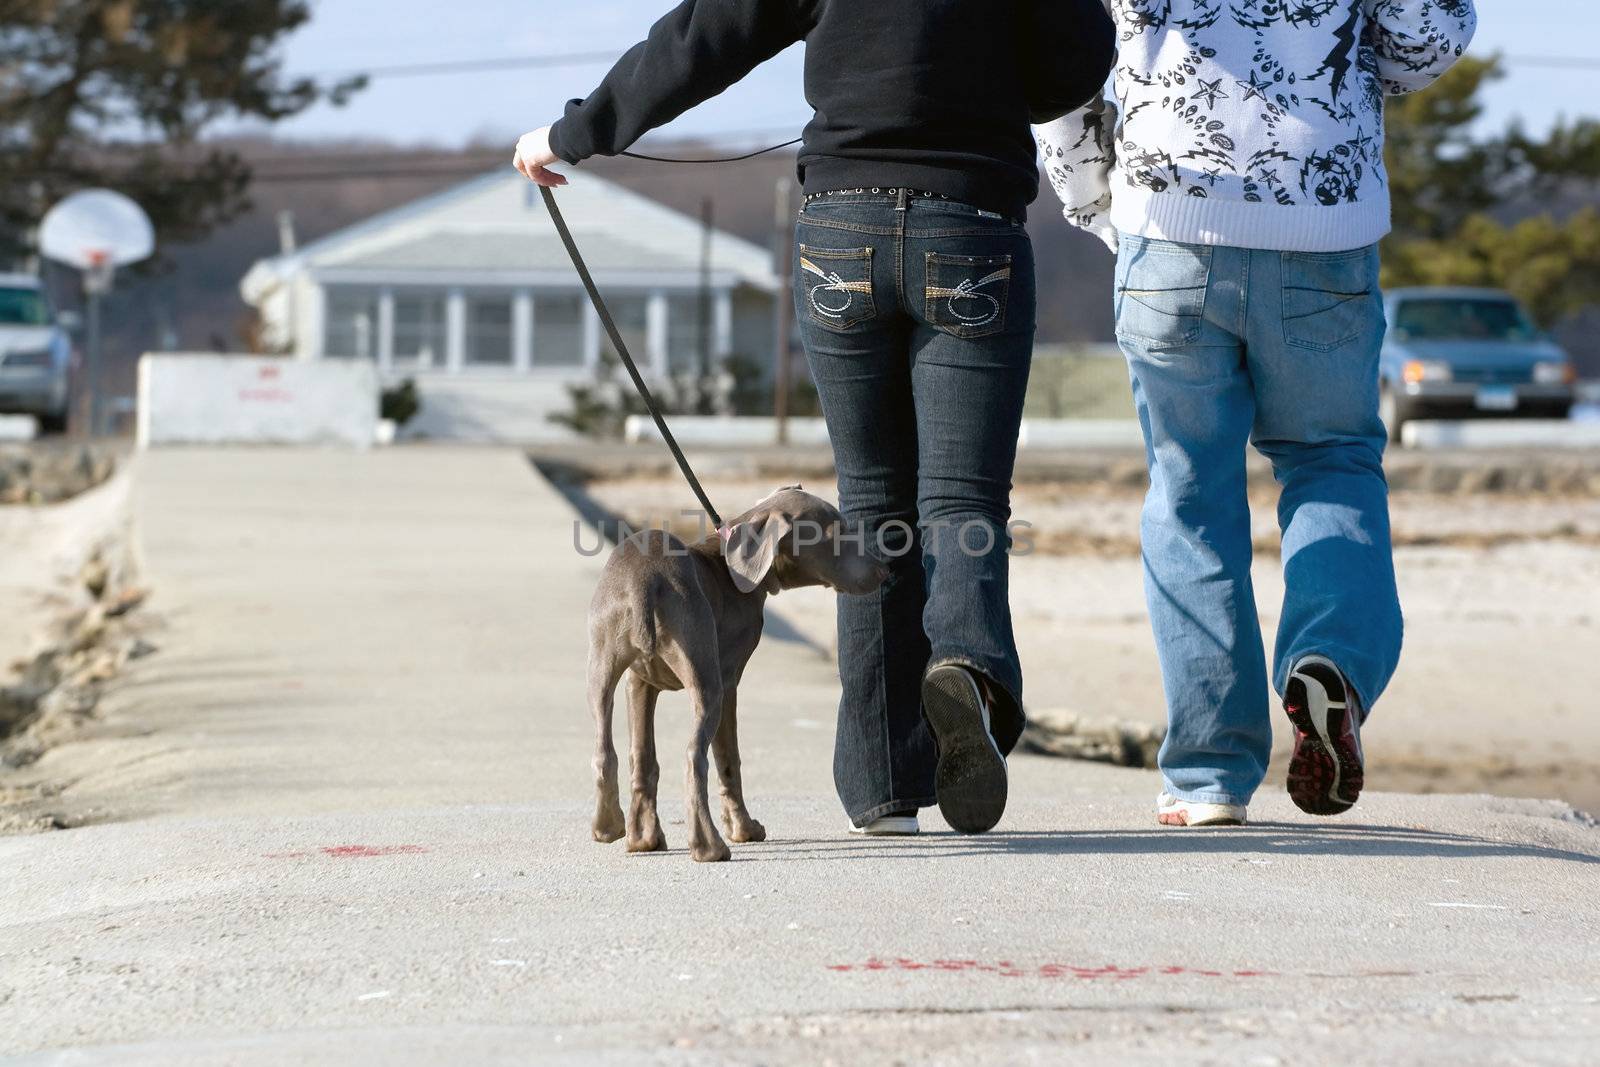 Walking The Puppy by graficallyminded